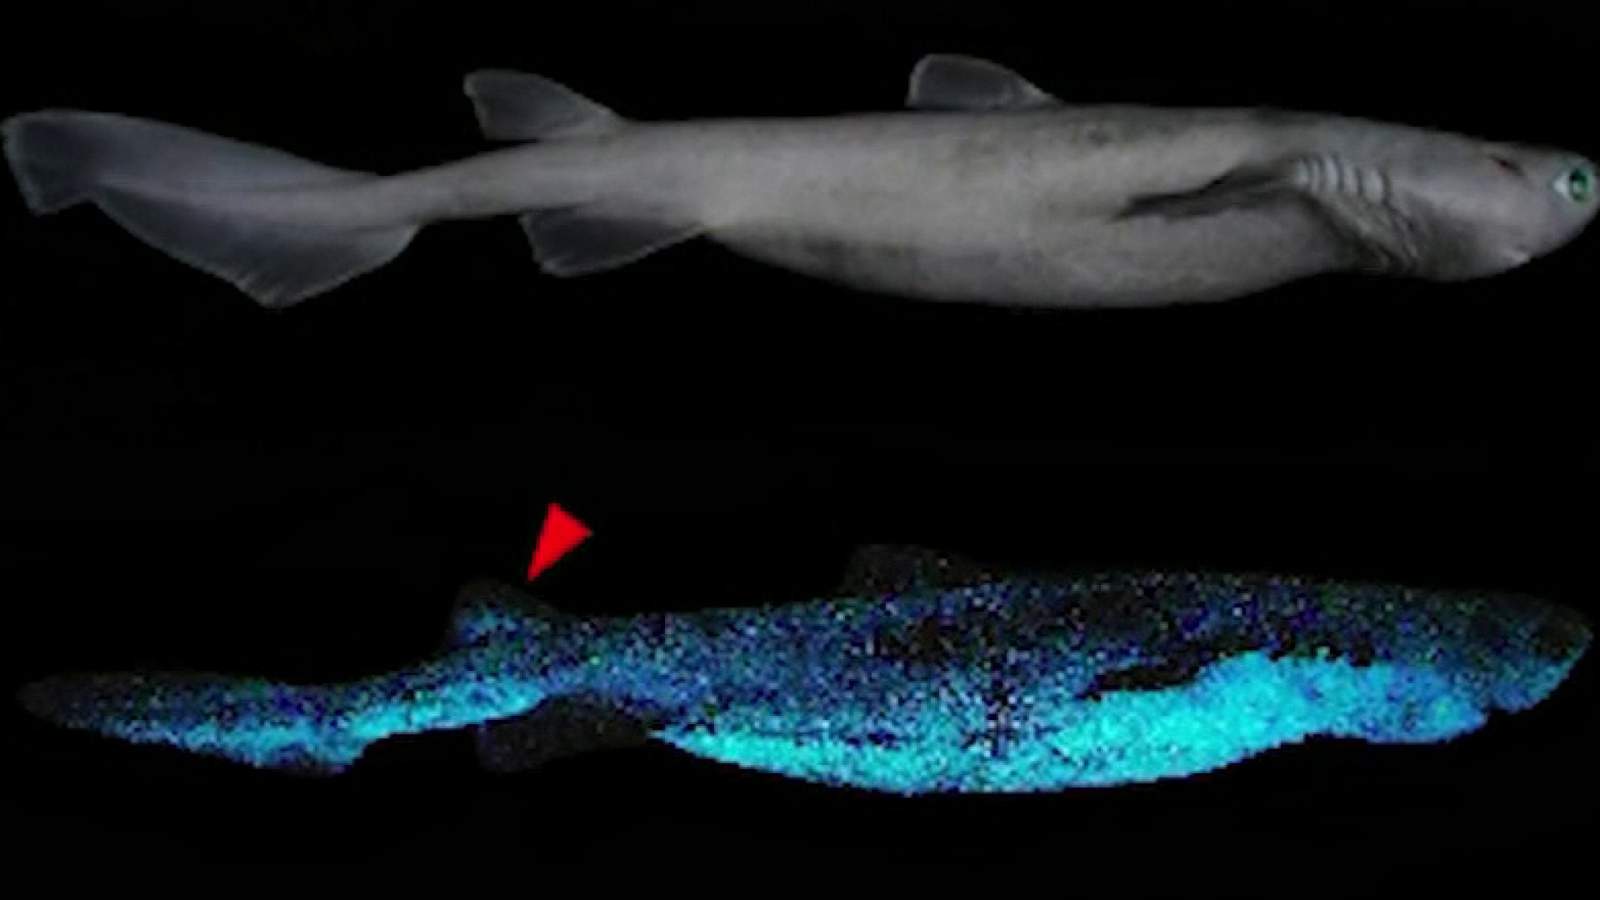 Shining discovery: Glow-in-the-dark sharks found off New Zealand